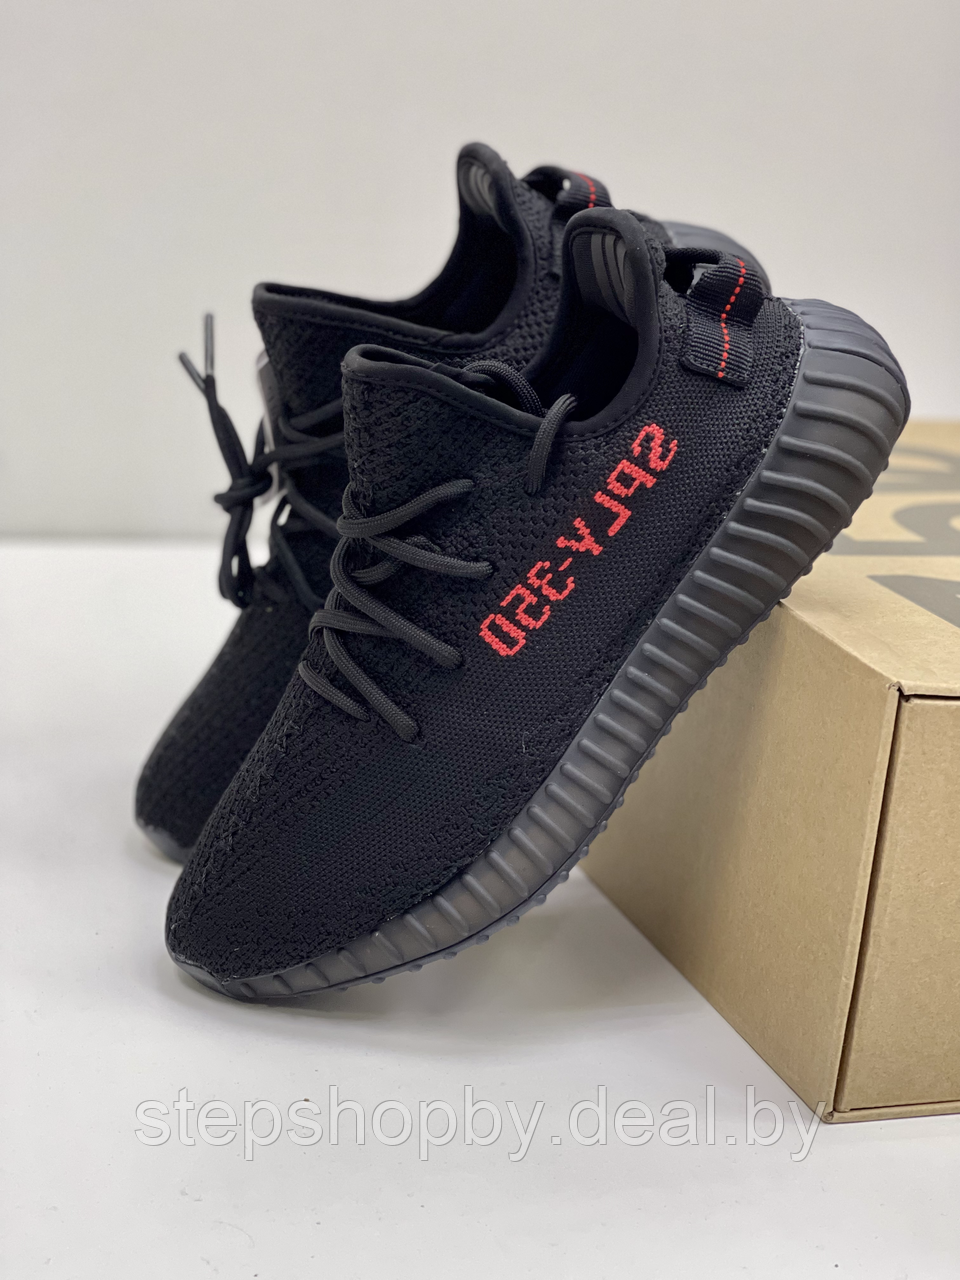 Adidas Yeezy Boost 350 V2 Core Black Red 'Bred' размер 40 - фото 2 - id-p177722957